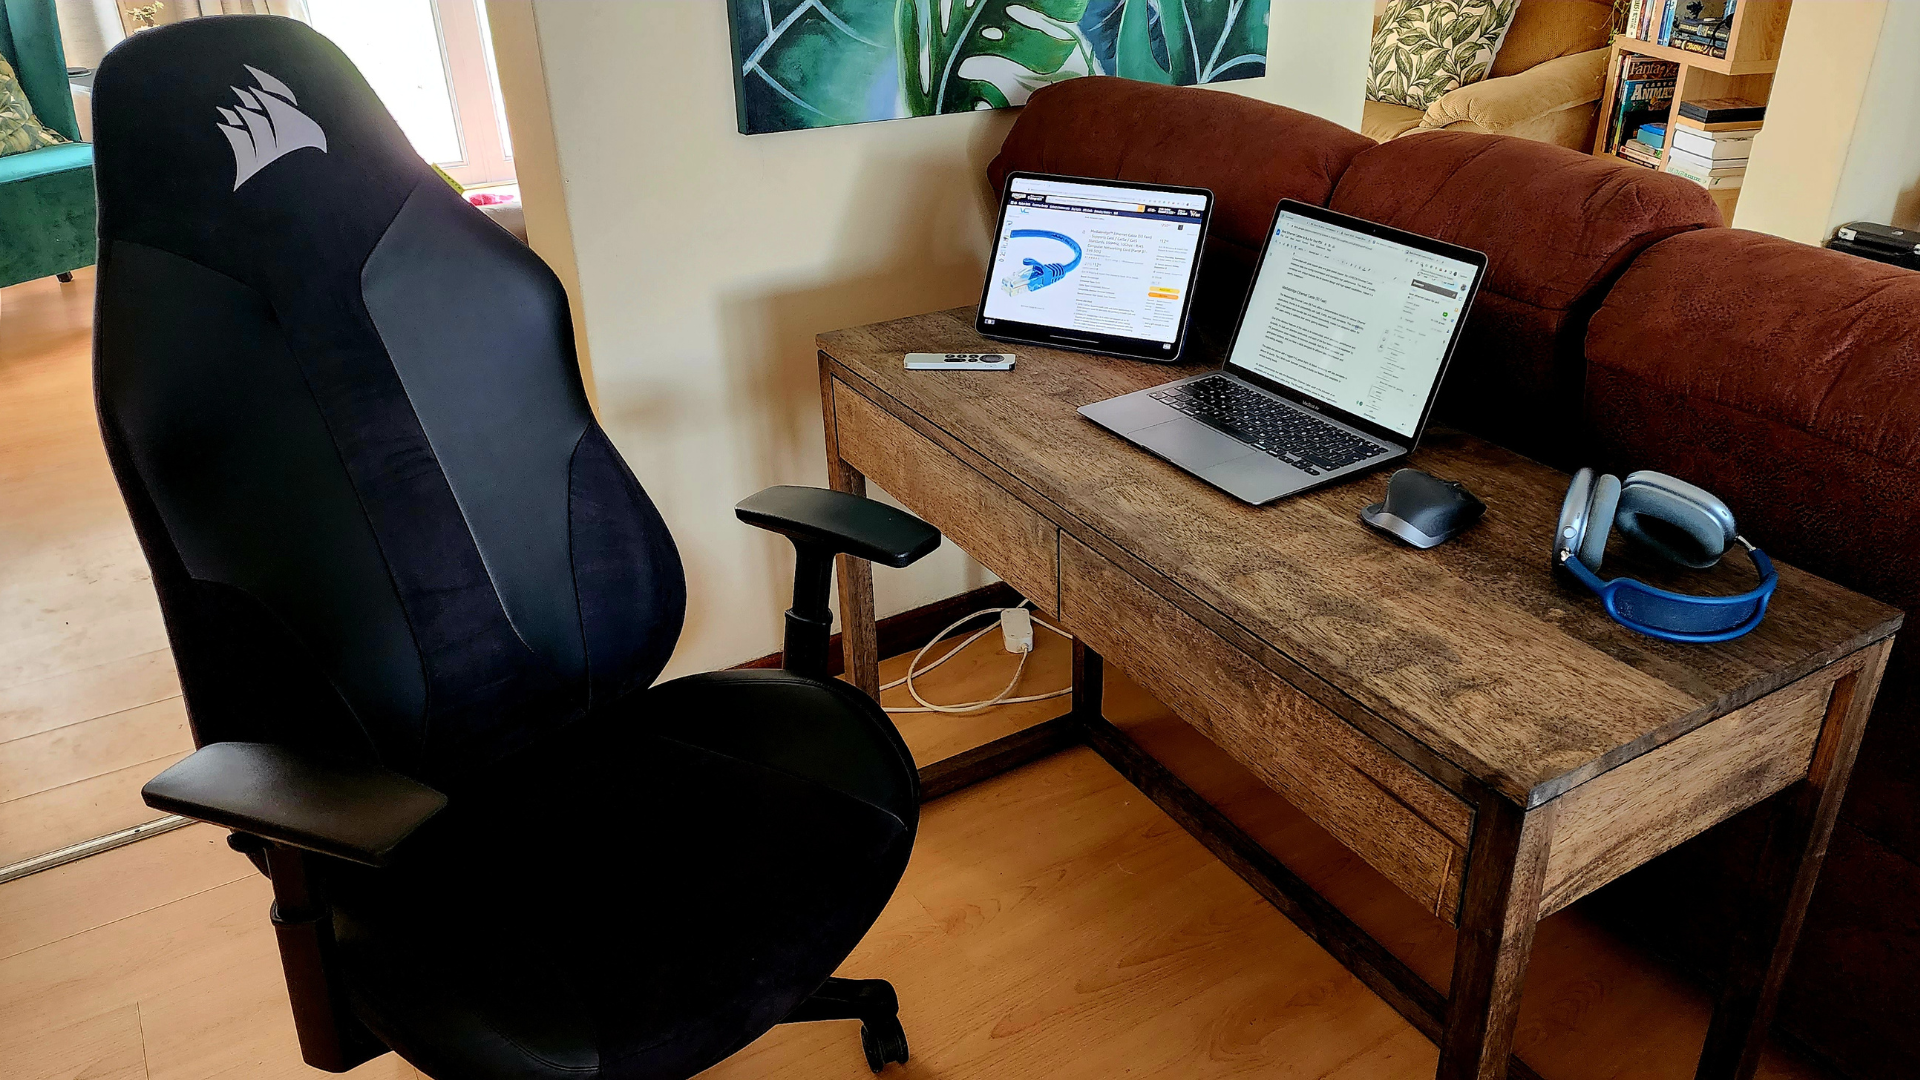 A desk With a MacBook and iPad next to some Airpods Max and an Apple TV Remote